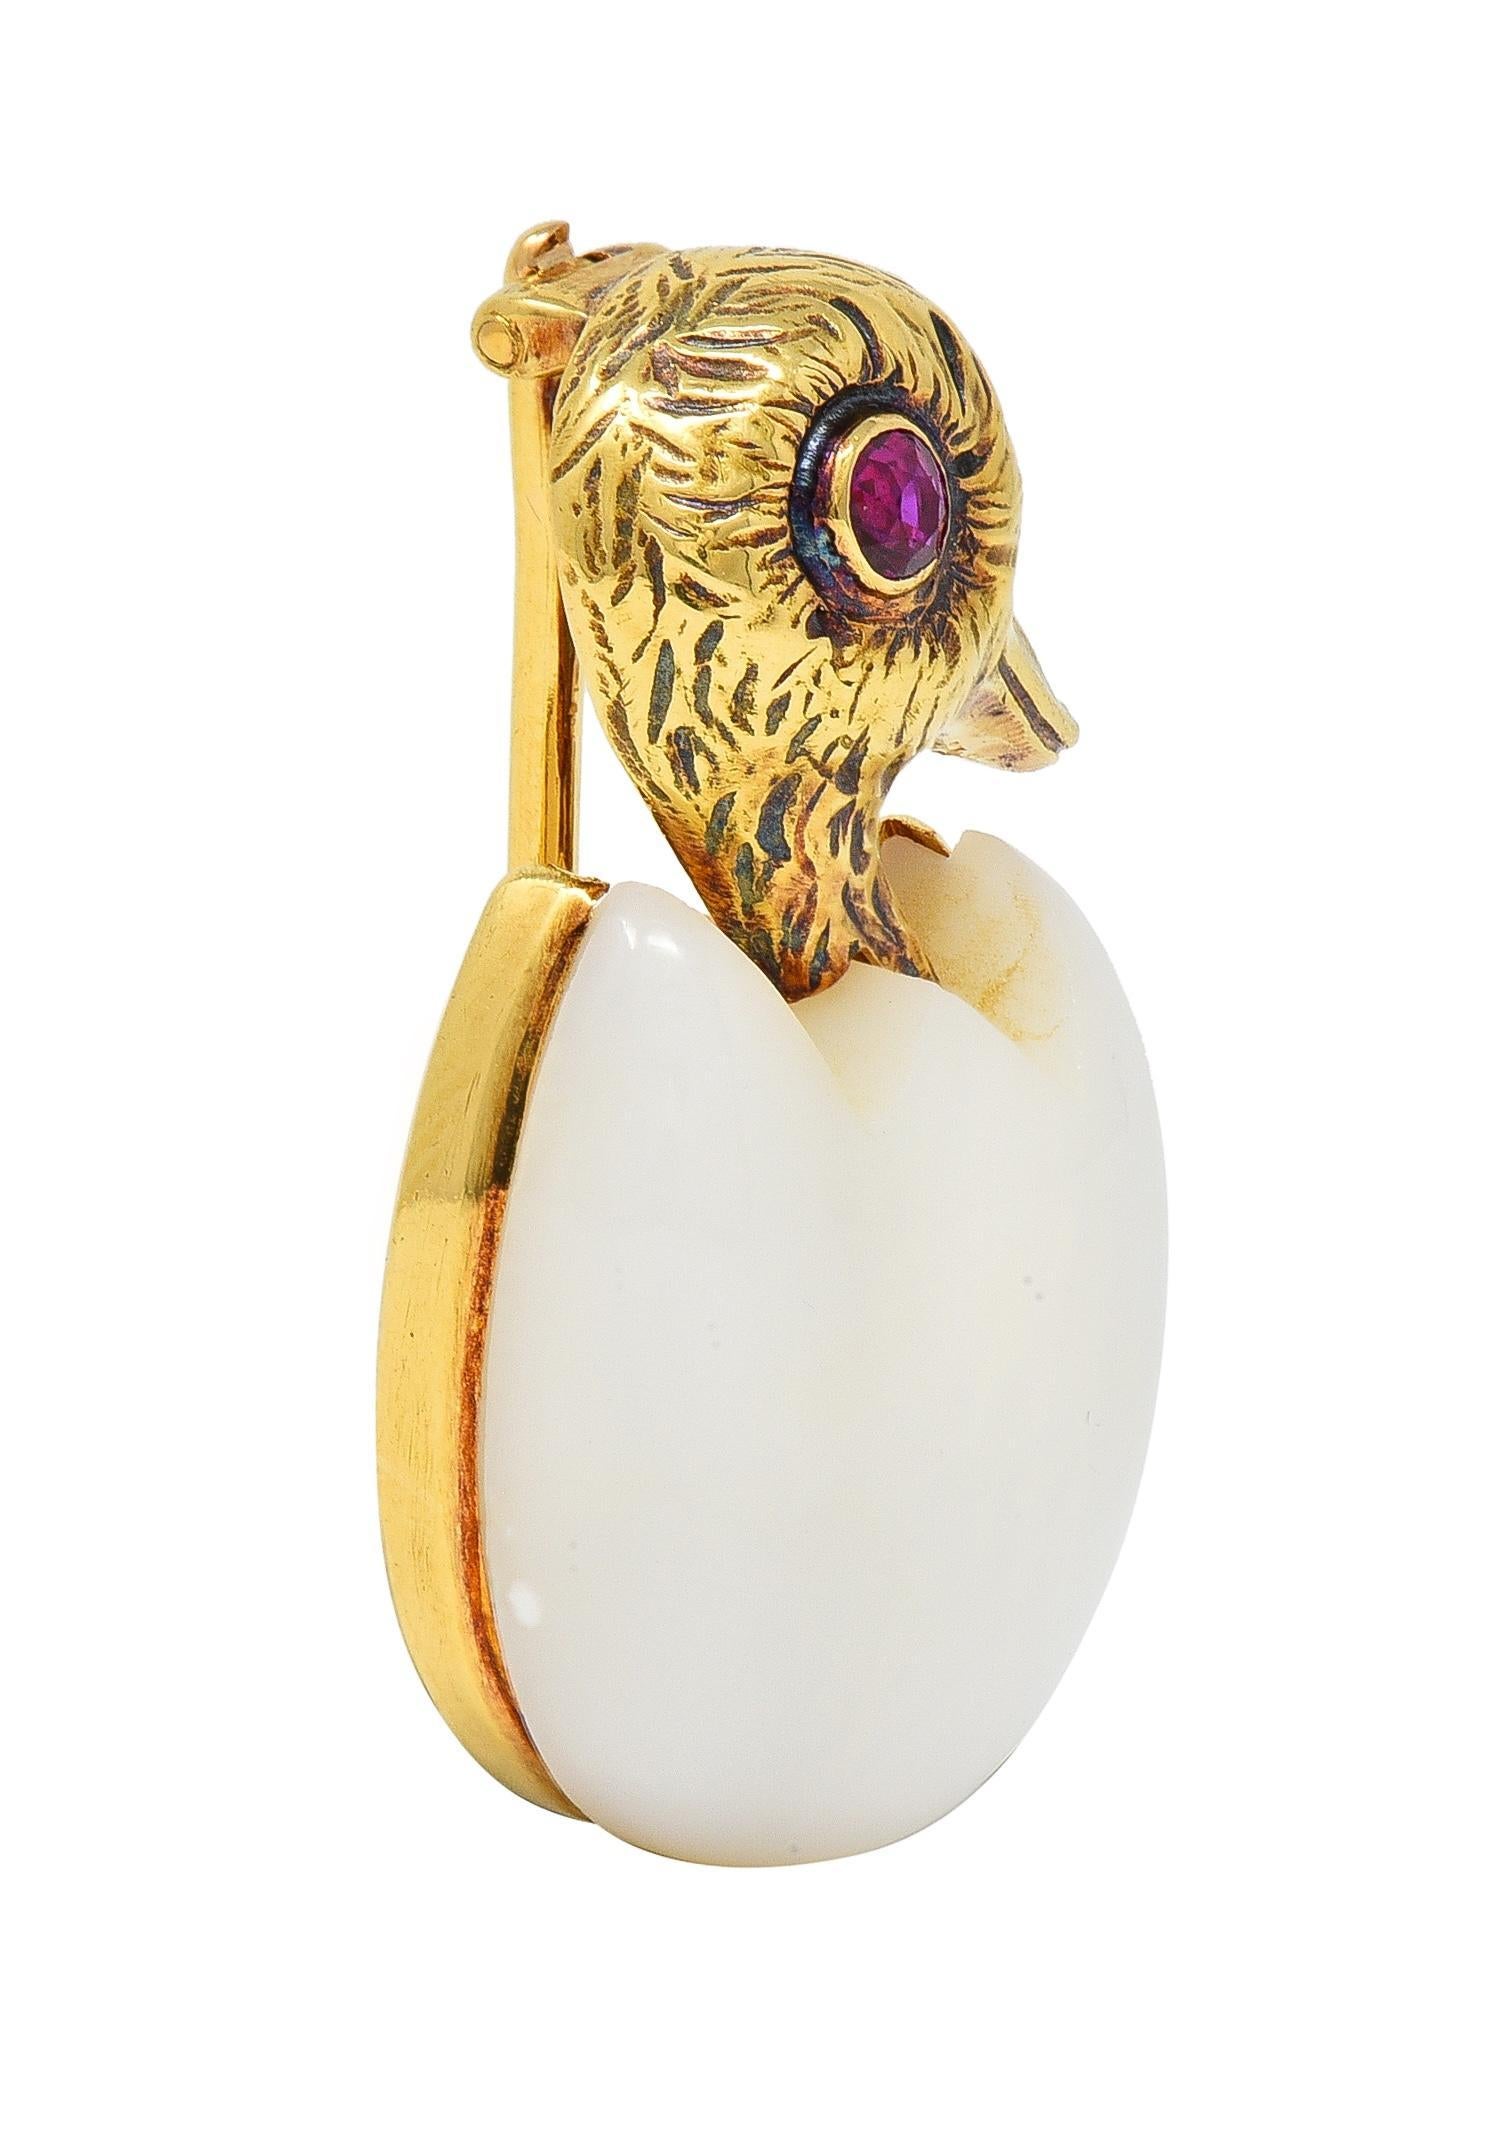 Cartier France 1960's Ruby Chalcedony 18 Karat Yellow Gold Hatching Bird Brooch In Excellent Condition For Sale In Philadelphia, PA